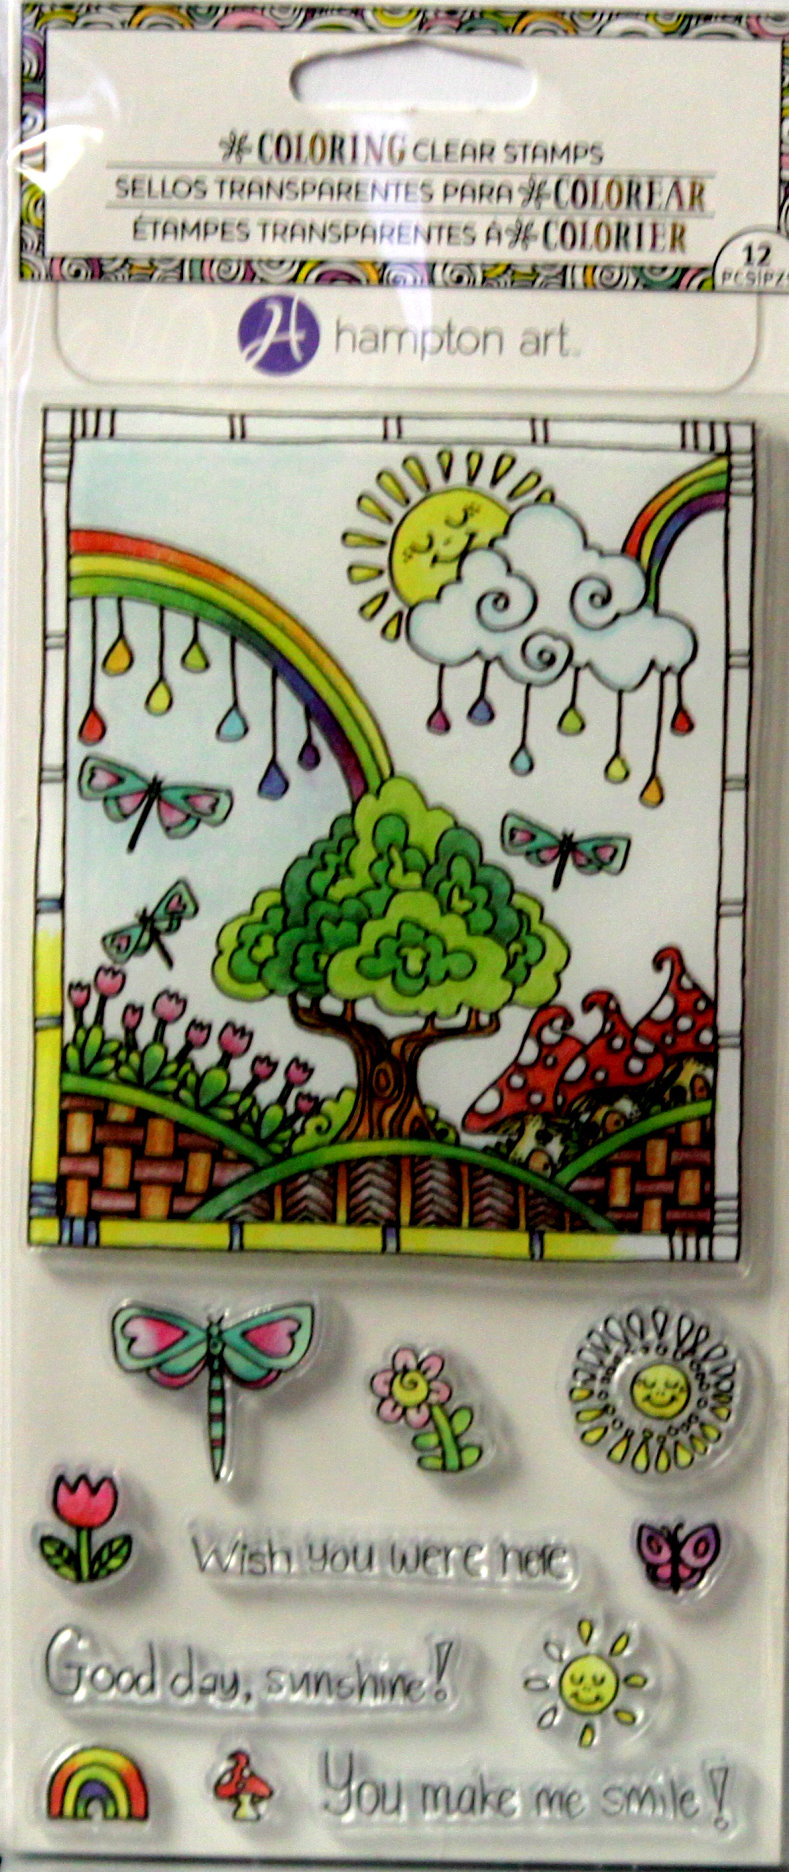 Hampton Art Coloring Rainbow Clear Stamps